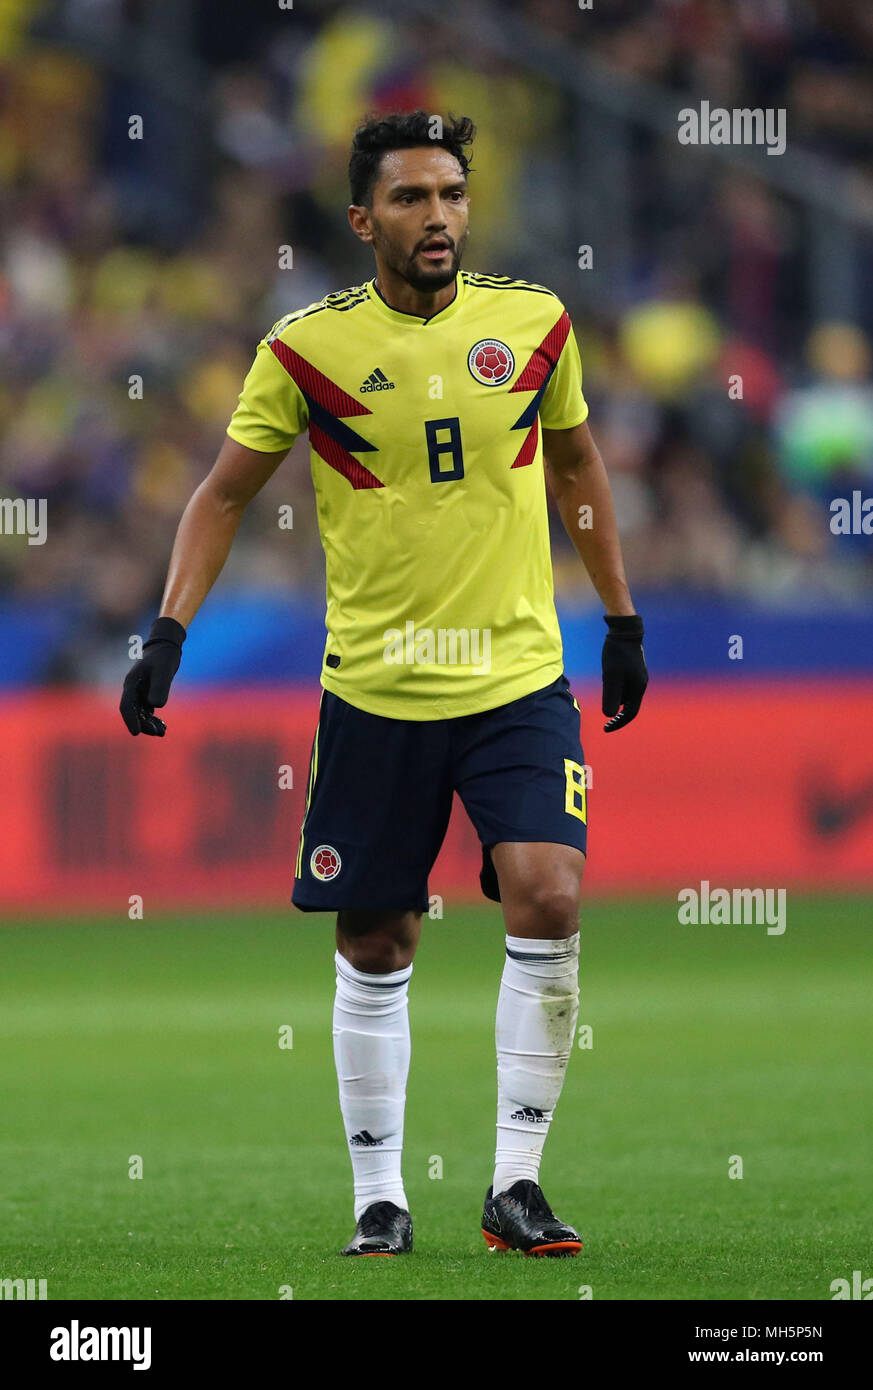 Abel Aguilar (COL), MARCH 23, 2018 - Football/Soccer : International friendly match between France 2-3 Colombia at Stade de France in Saint-Denis, France, Credit: AFLO/Alamy Live News Stock Photo